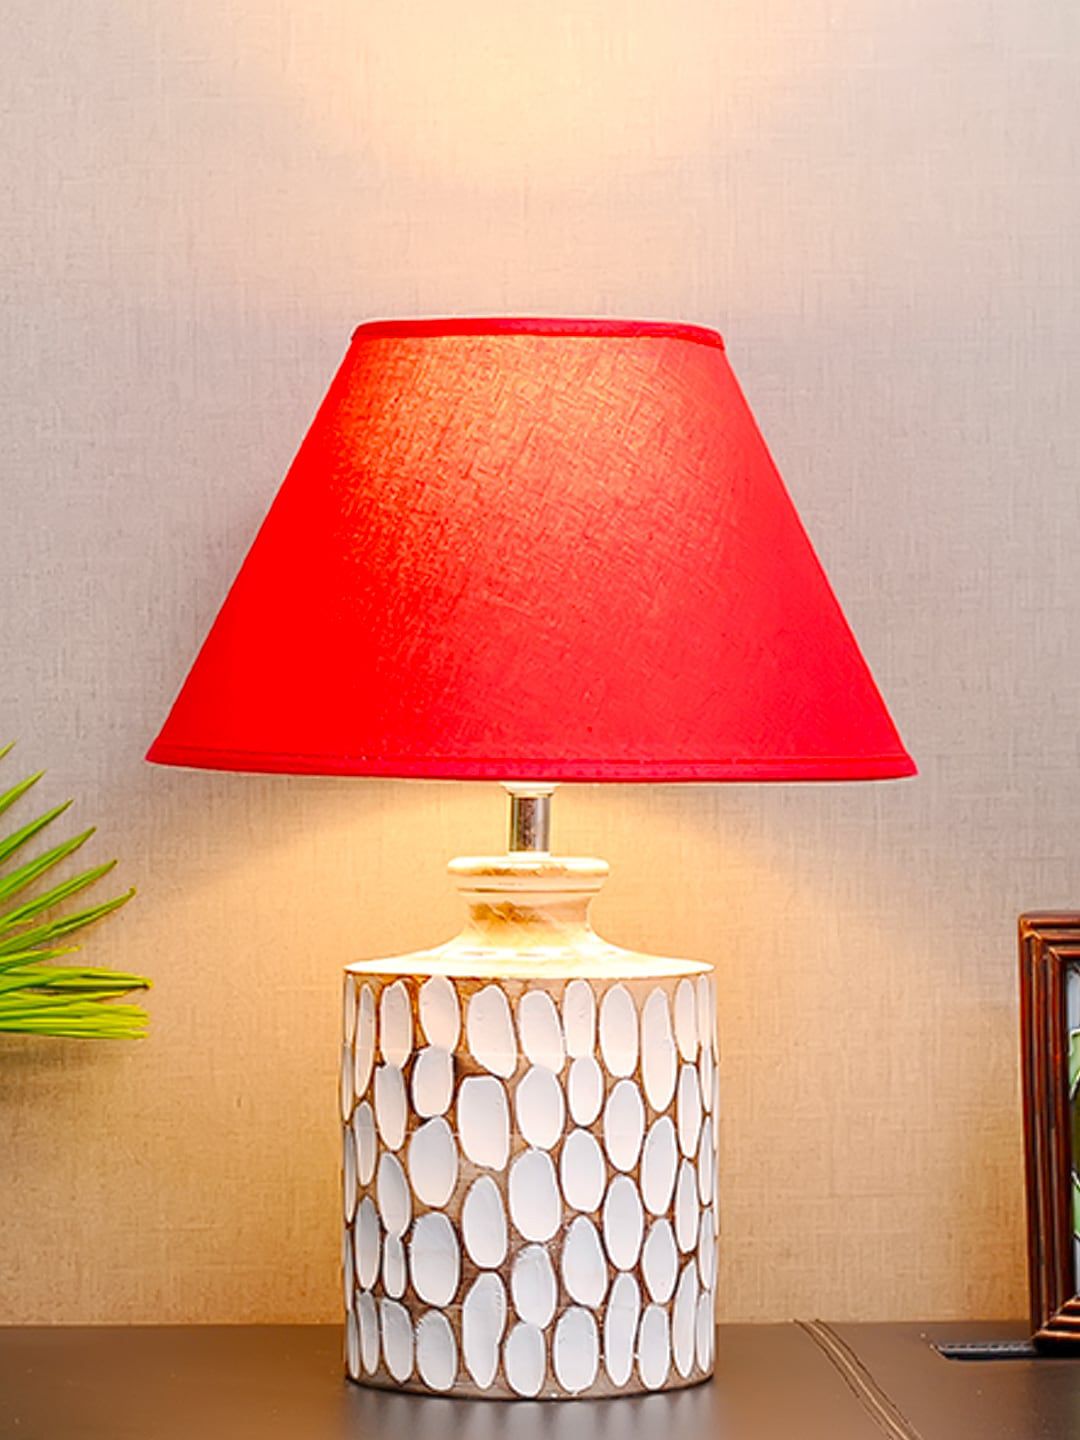 THE LIGHT STORE White Self-Design Table Lamp With Red Shade Price in India